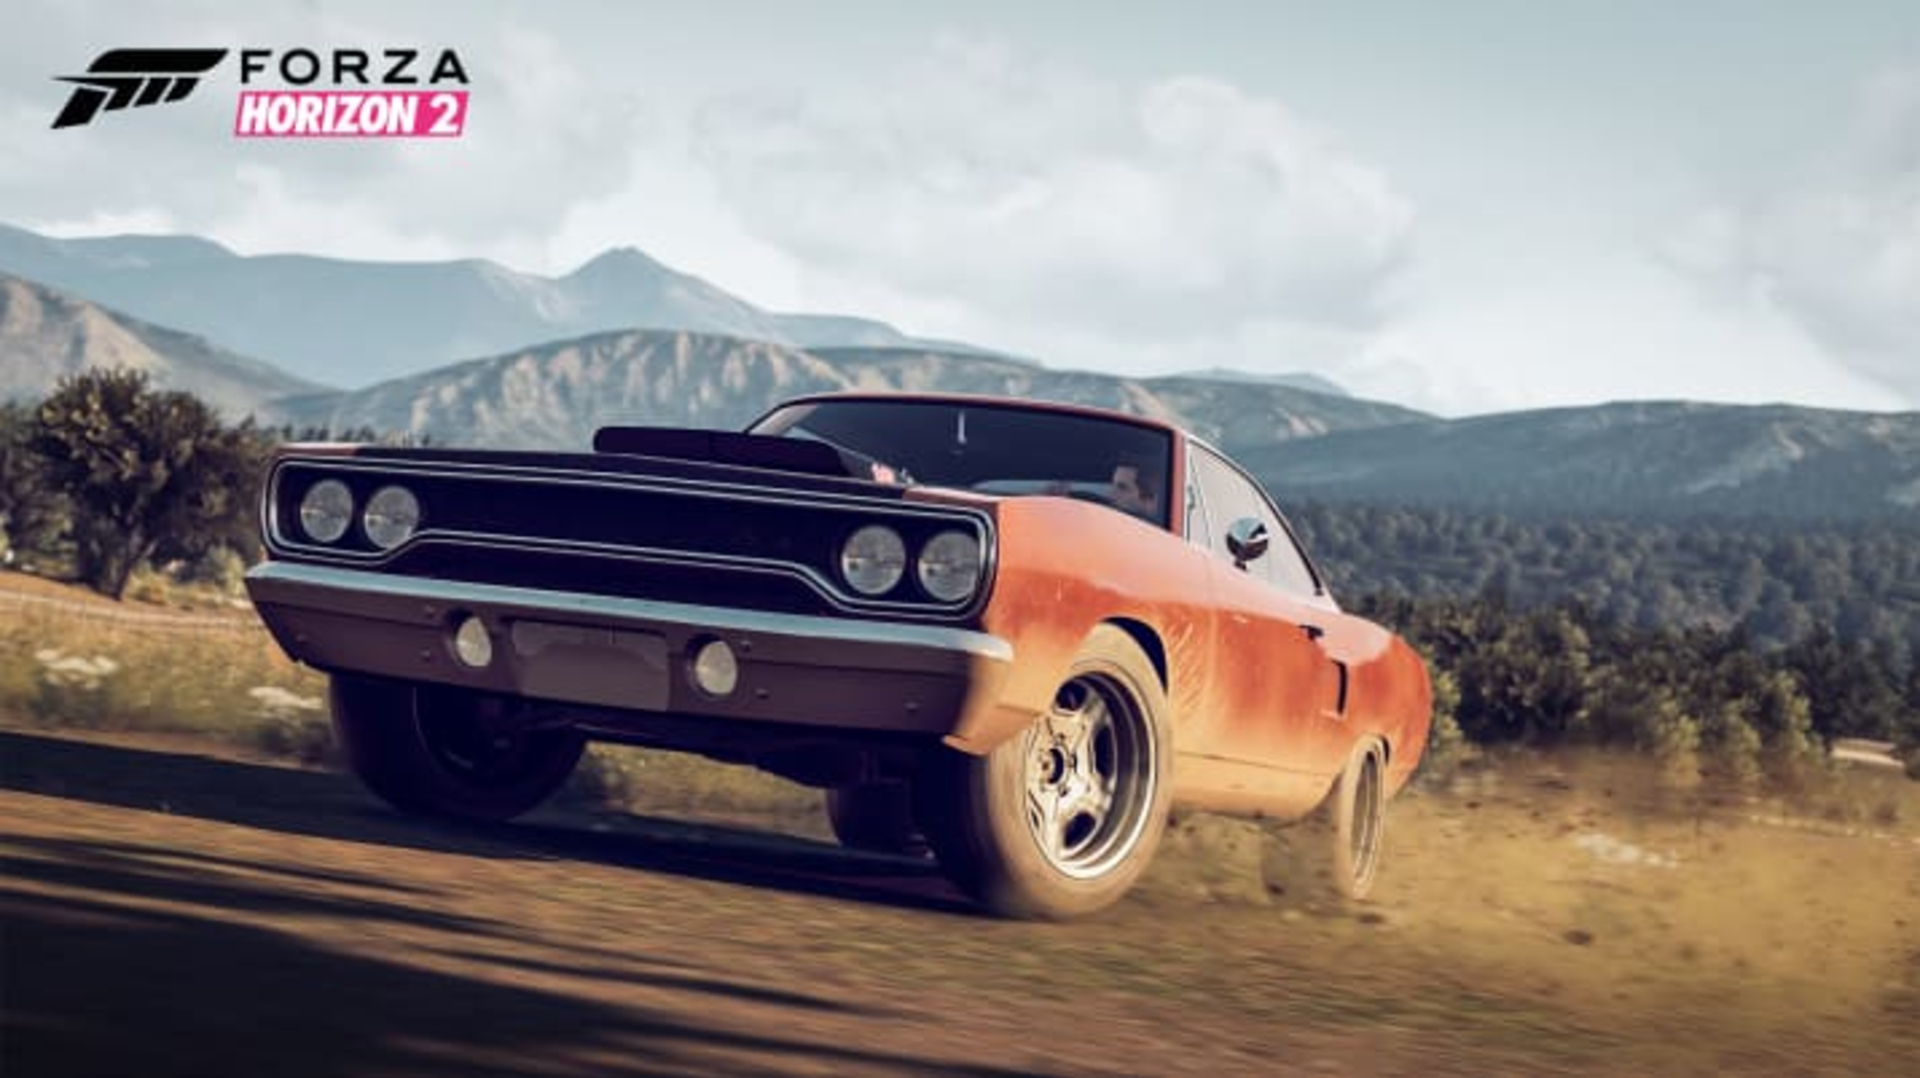 Forza Horizon 2 Presents Fast and Furious 1970 Plymouth Road Runner